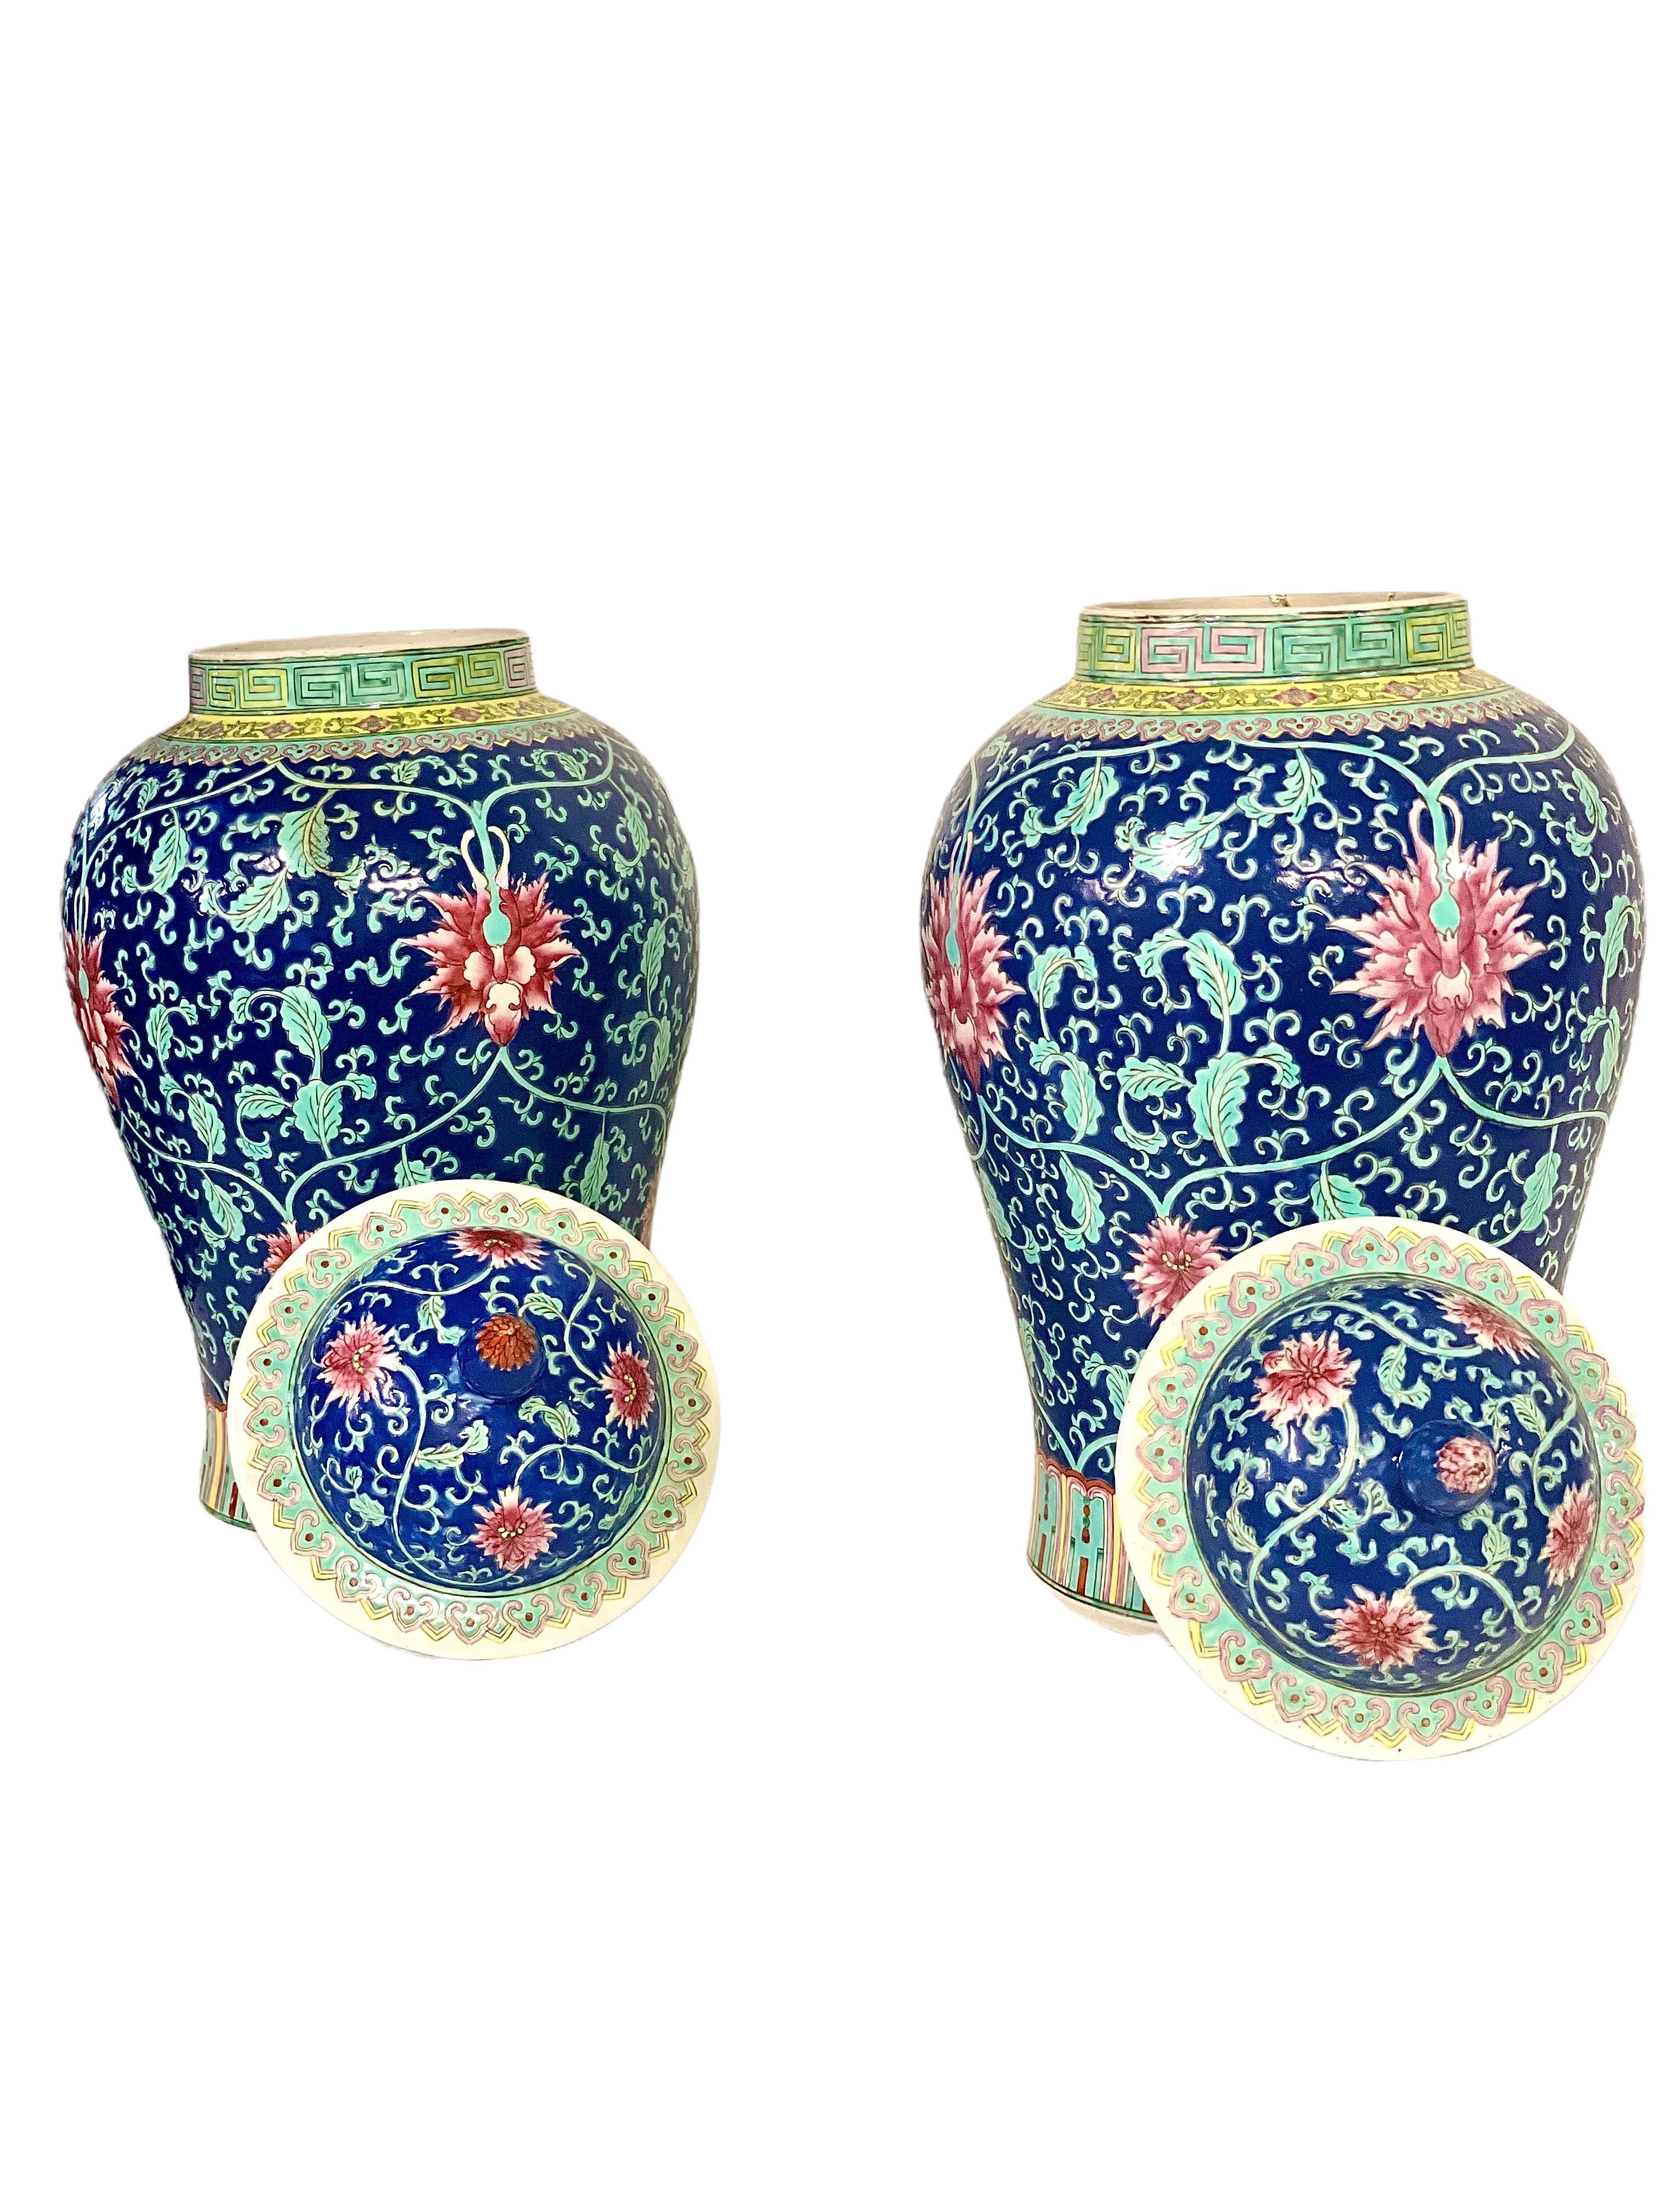 A finely decorated pair of large Chinese Republic period baluster-shaped vases, featuring a vividly colourful hand-painted design of red peonies and pale green foliage on a dark blue background. Dating from the 20th century, each vase has a closely